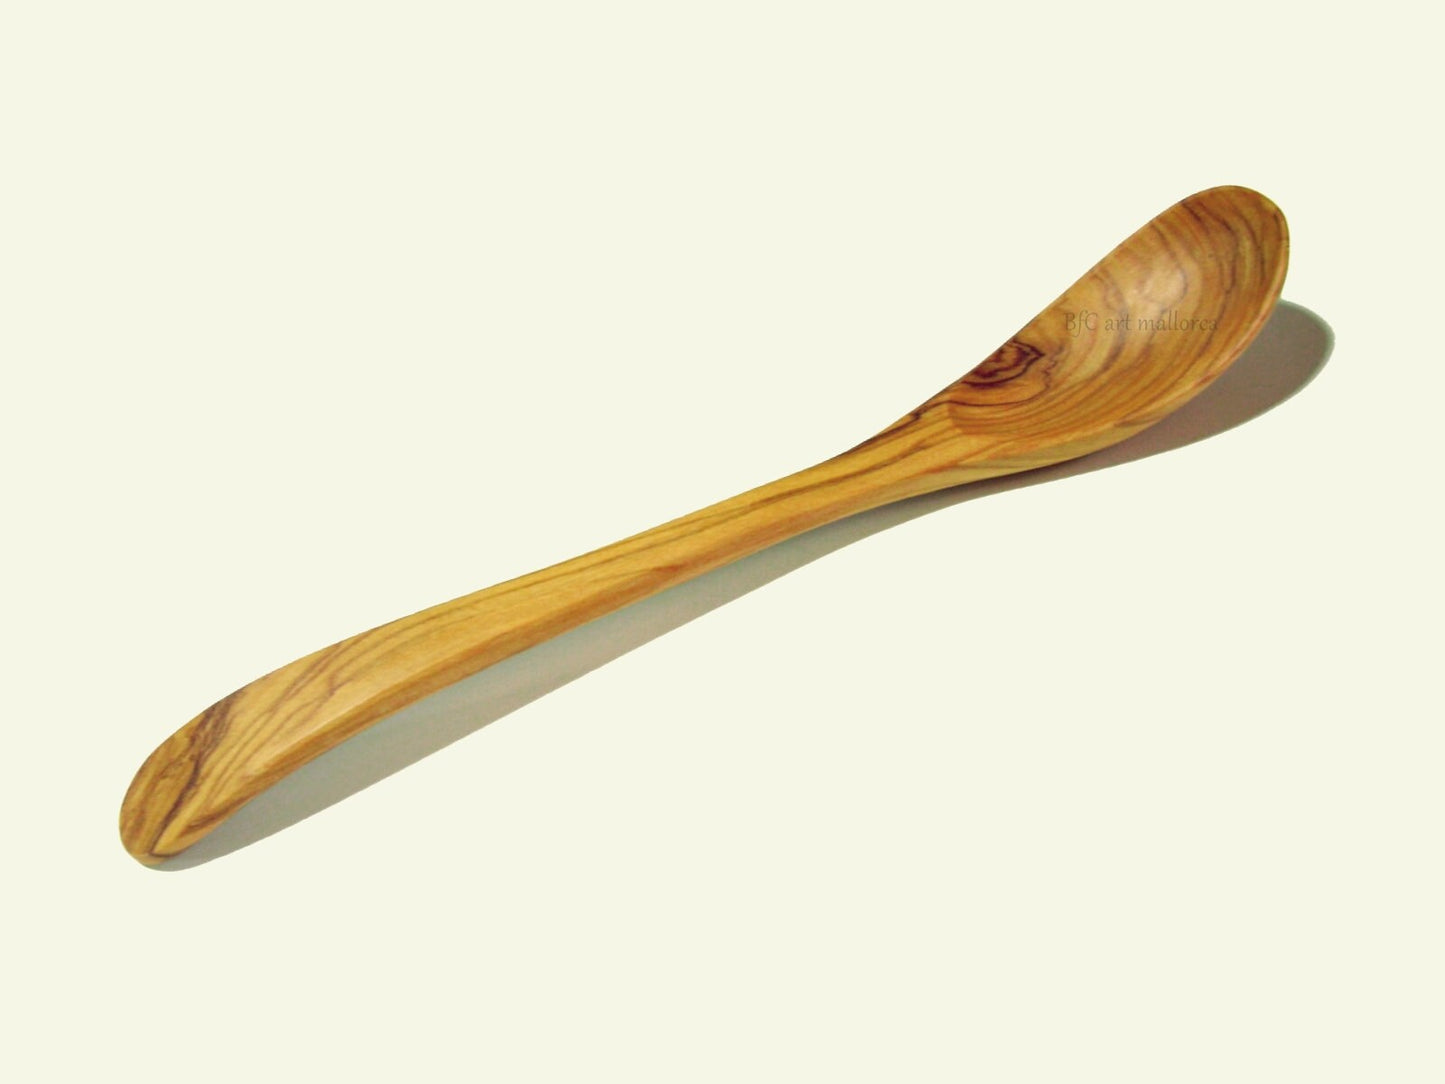 Curved Spoon, Curved Craft Spoon, Spoon For Eating, Cooking Spoon, Kitchenware Spoon, Spoon Sooking, Wooden Spoon, Wood Spoon, Eco spoon